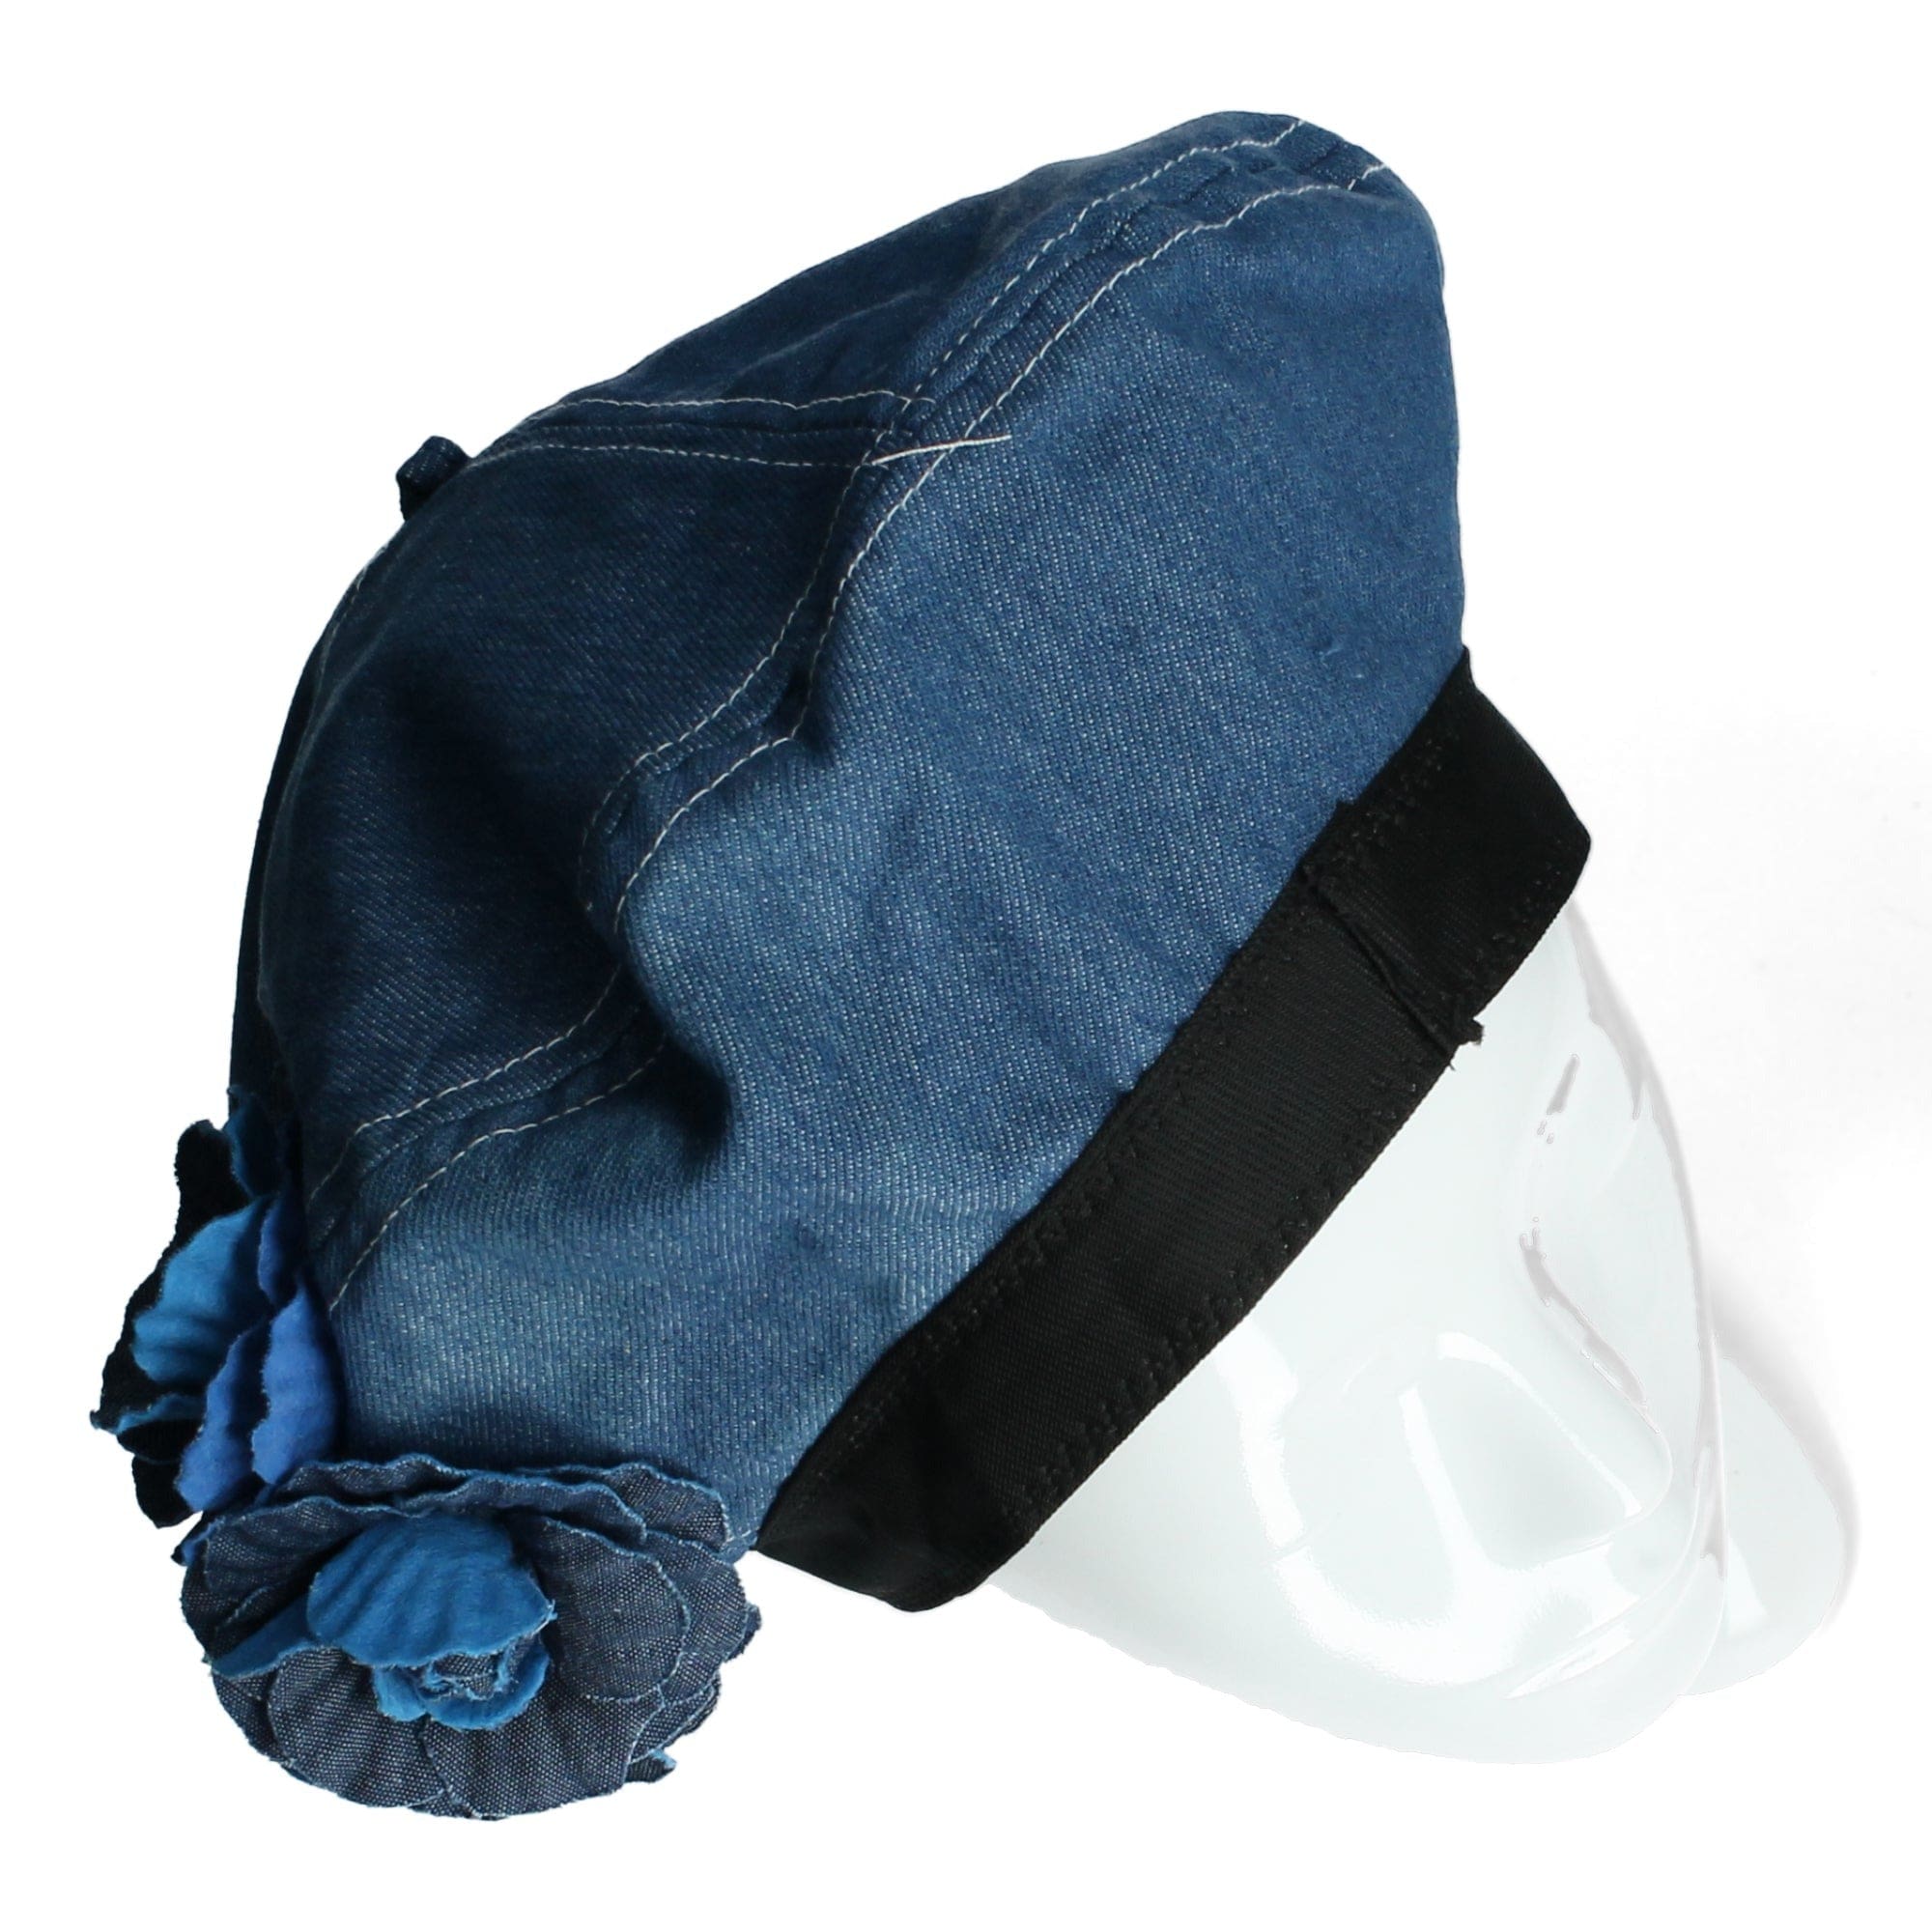 Jeans beret with flowers - Hats